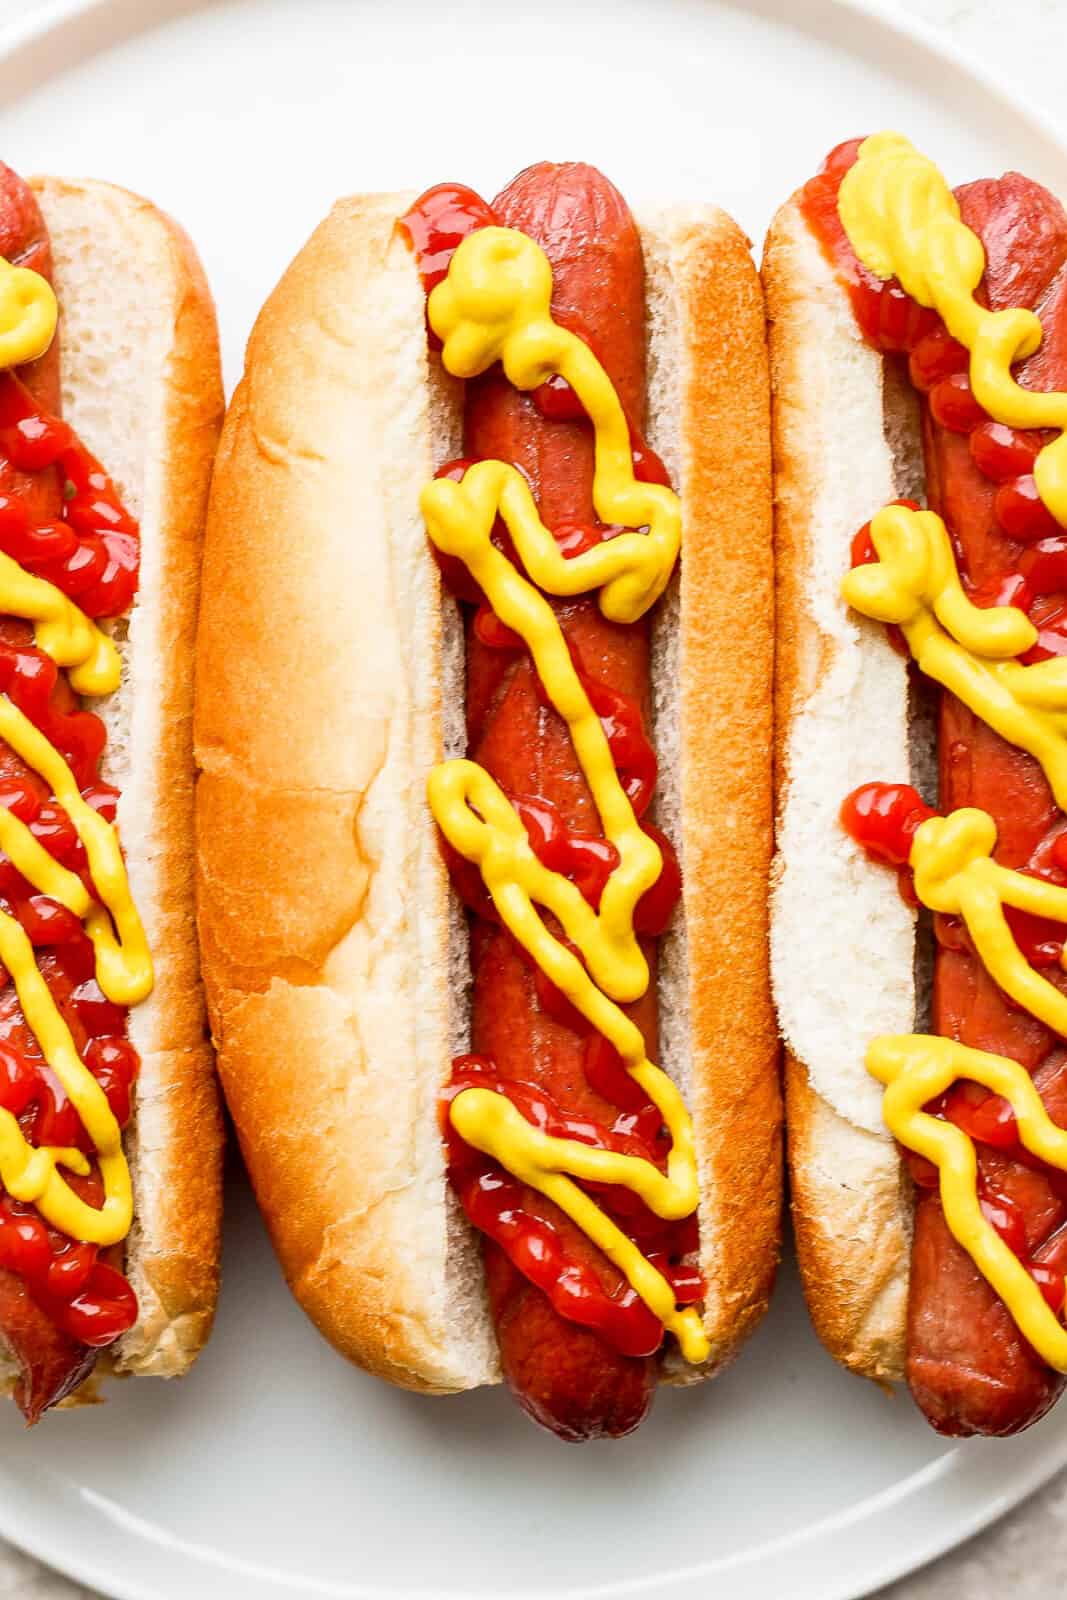 Three hot dogs in buns with condiments on top.